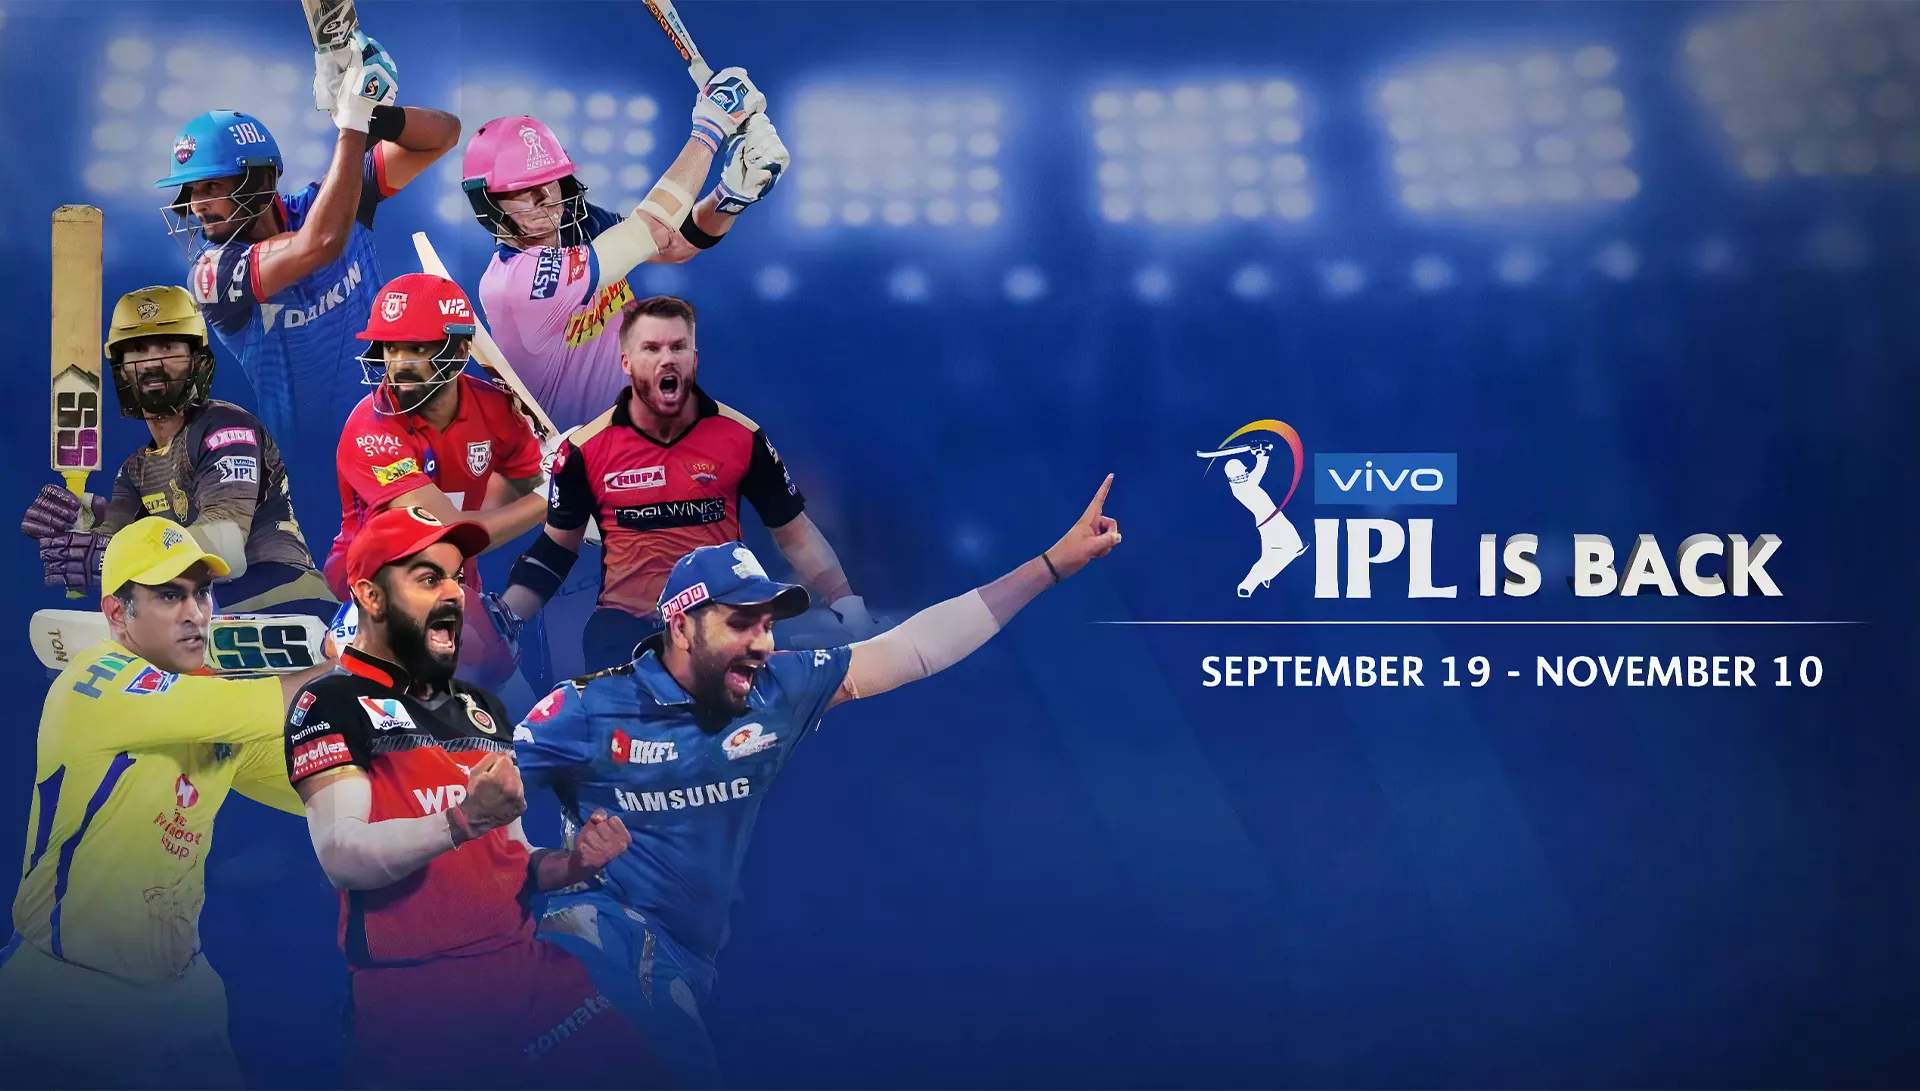 You can place bets on IPL after registering on the site